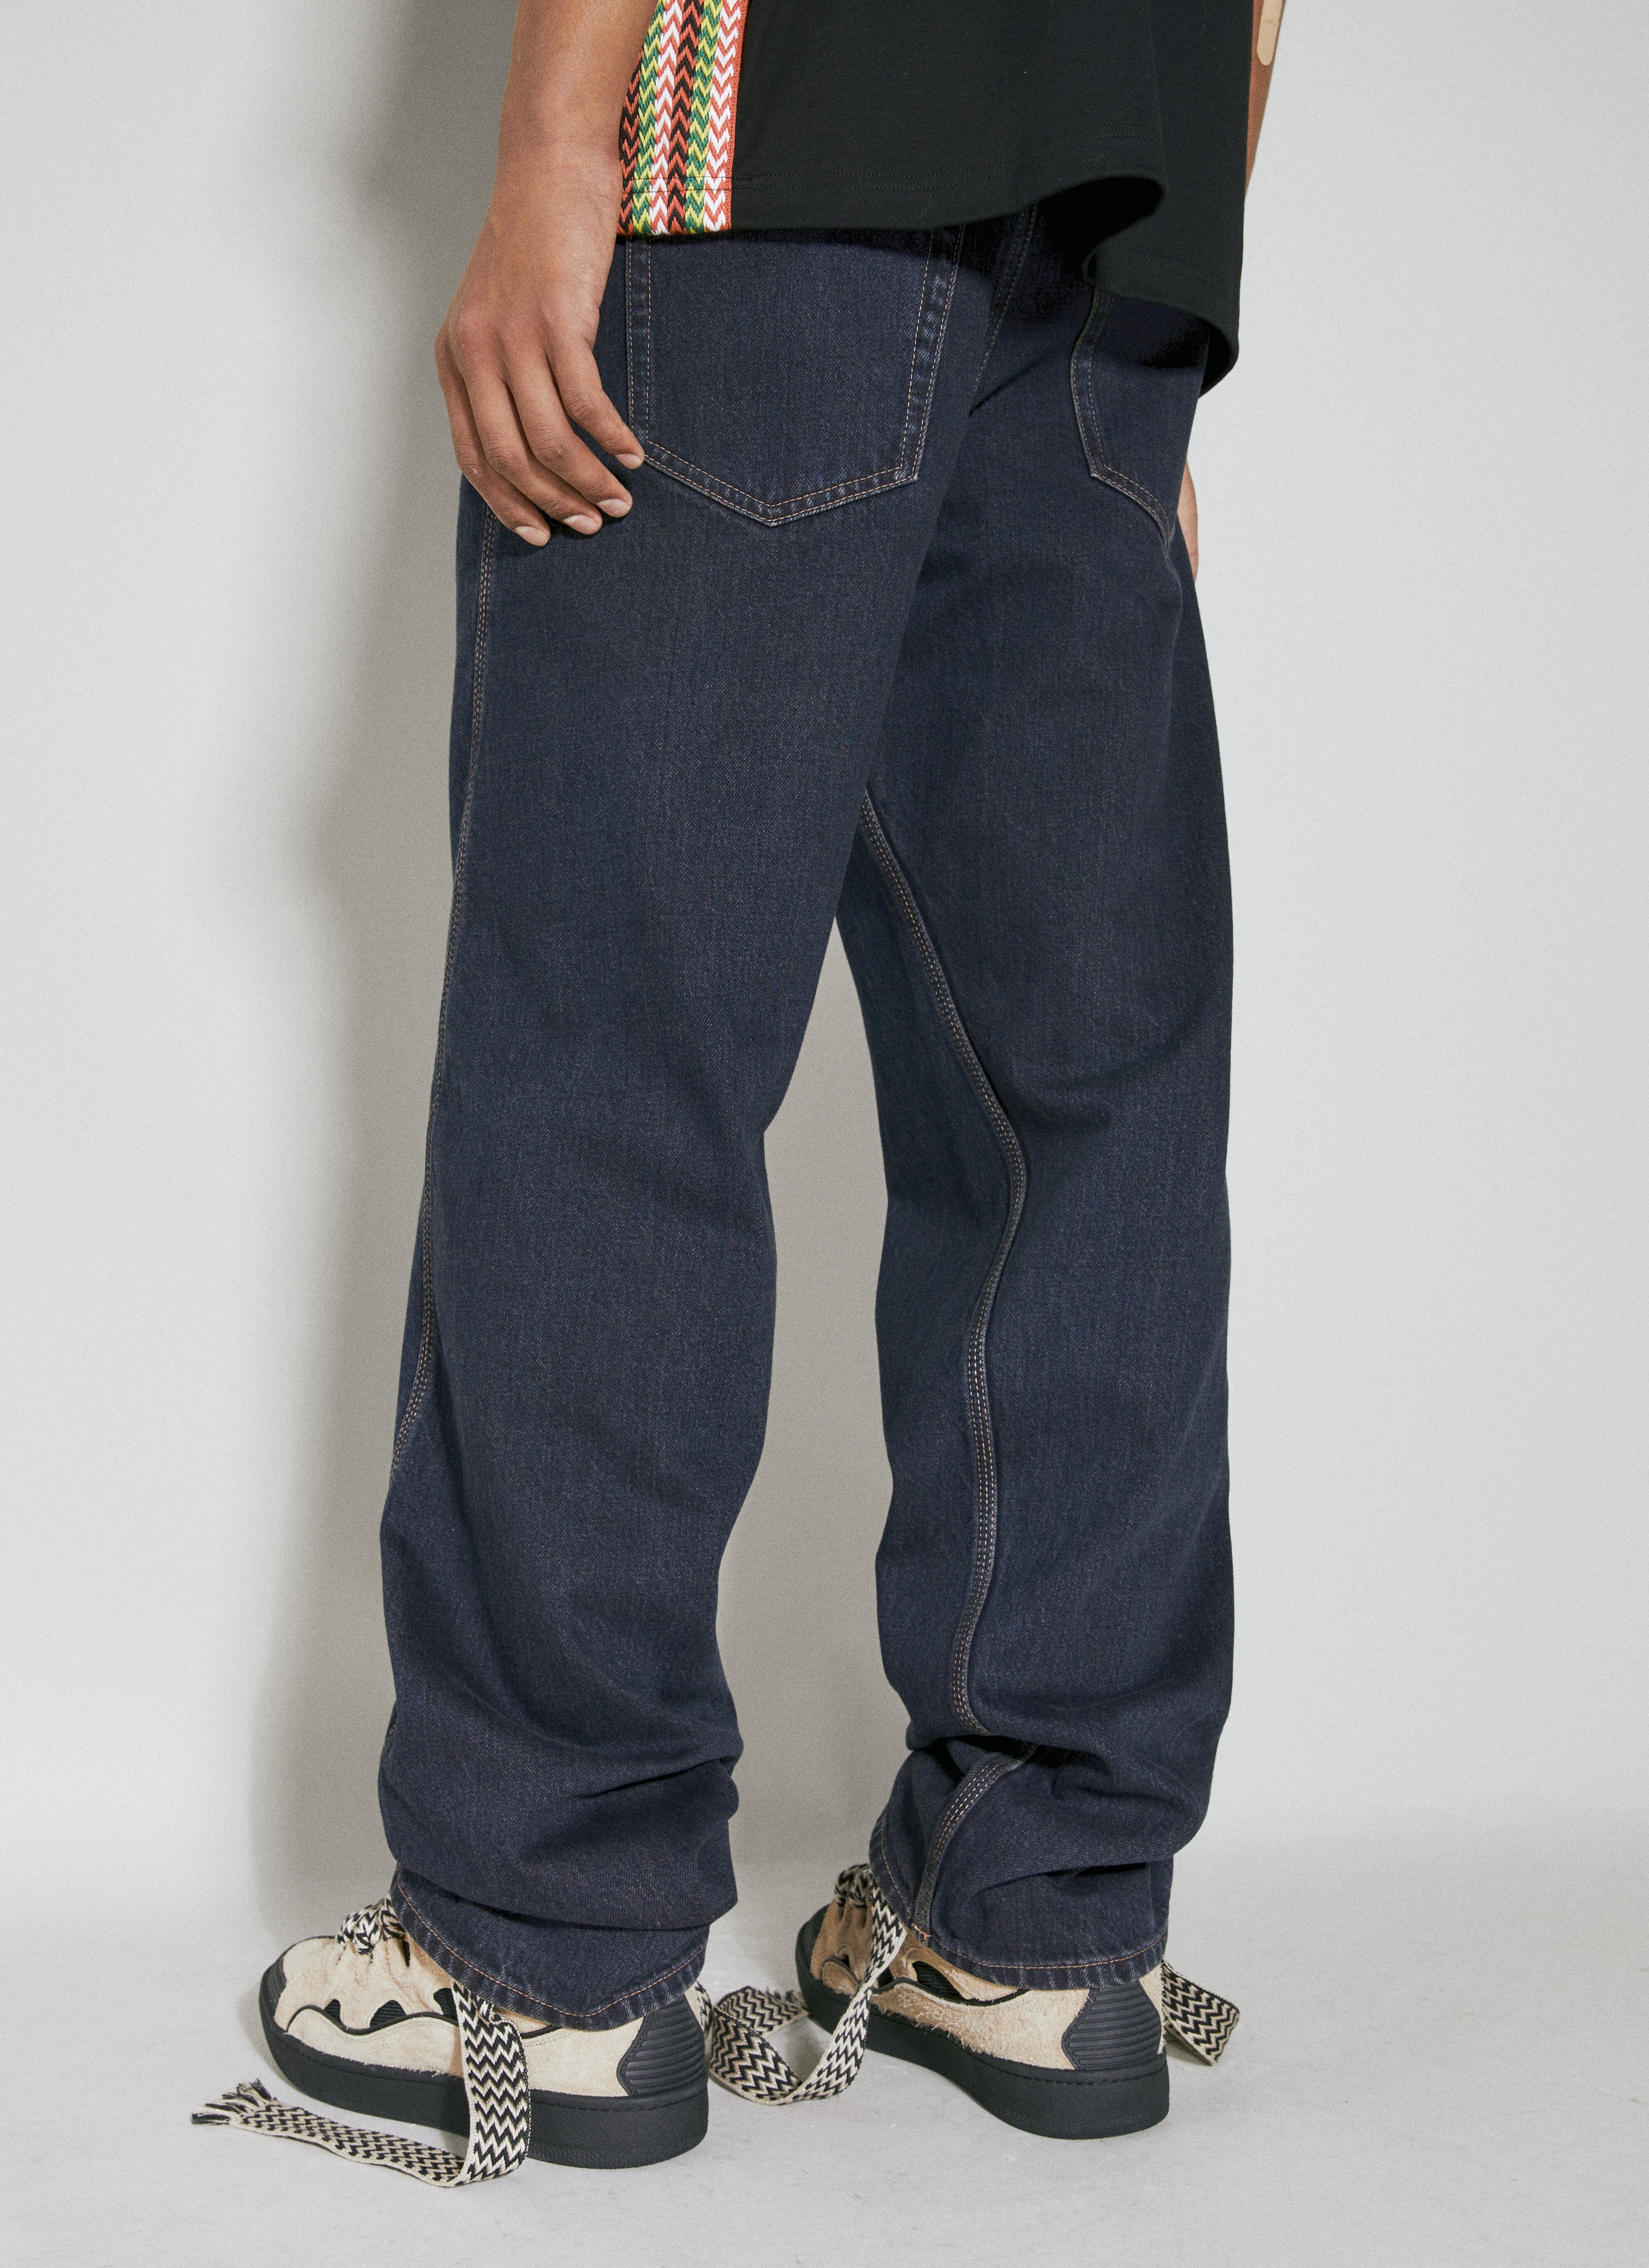 Baggy Twisted Leg Jeans - 5